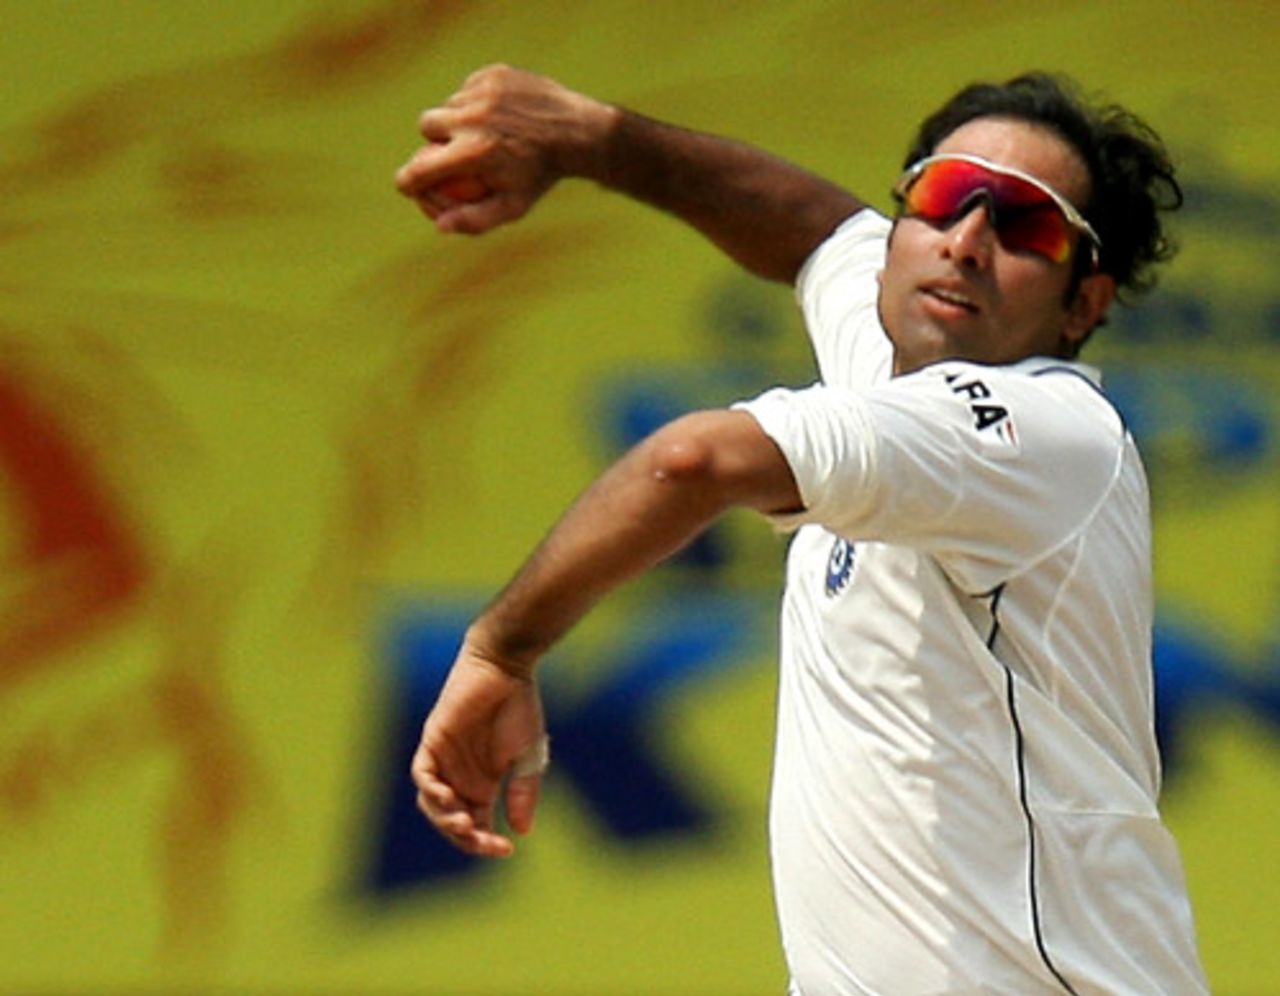 VVS Laxman rolls his arm over, India v South Africa, 1st Test, Chennai, 5th day, March 30, 2008 